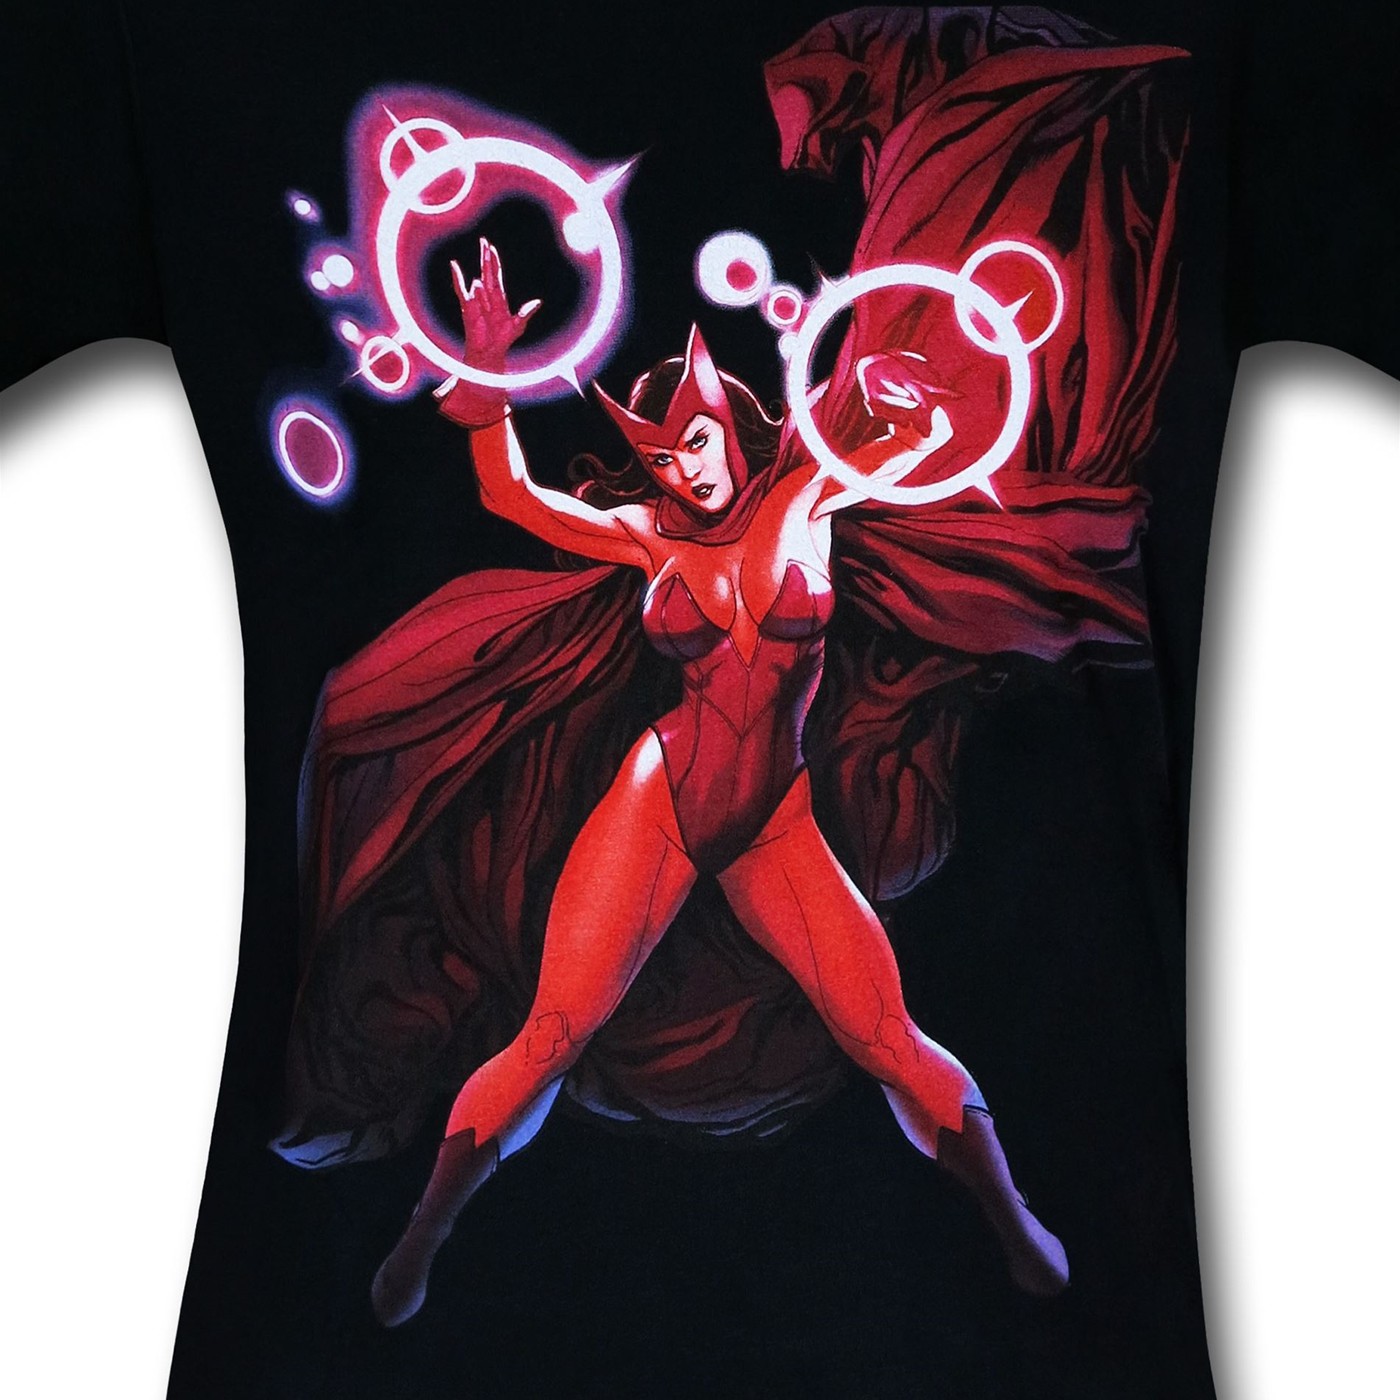 Scarlet Witch Defiance 30 Single T-Shirt